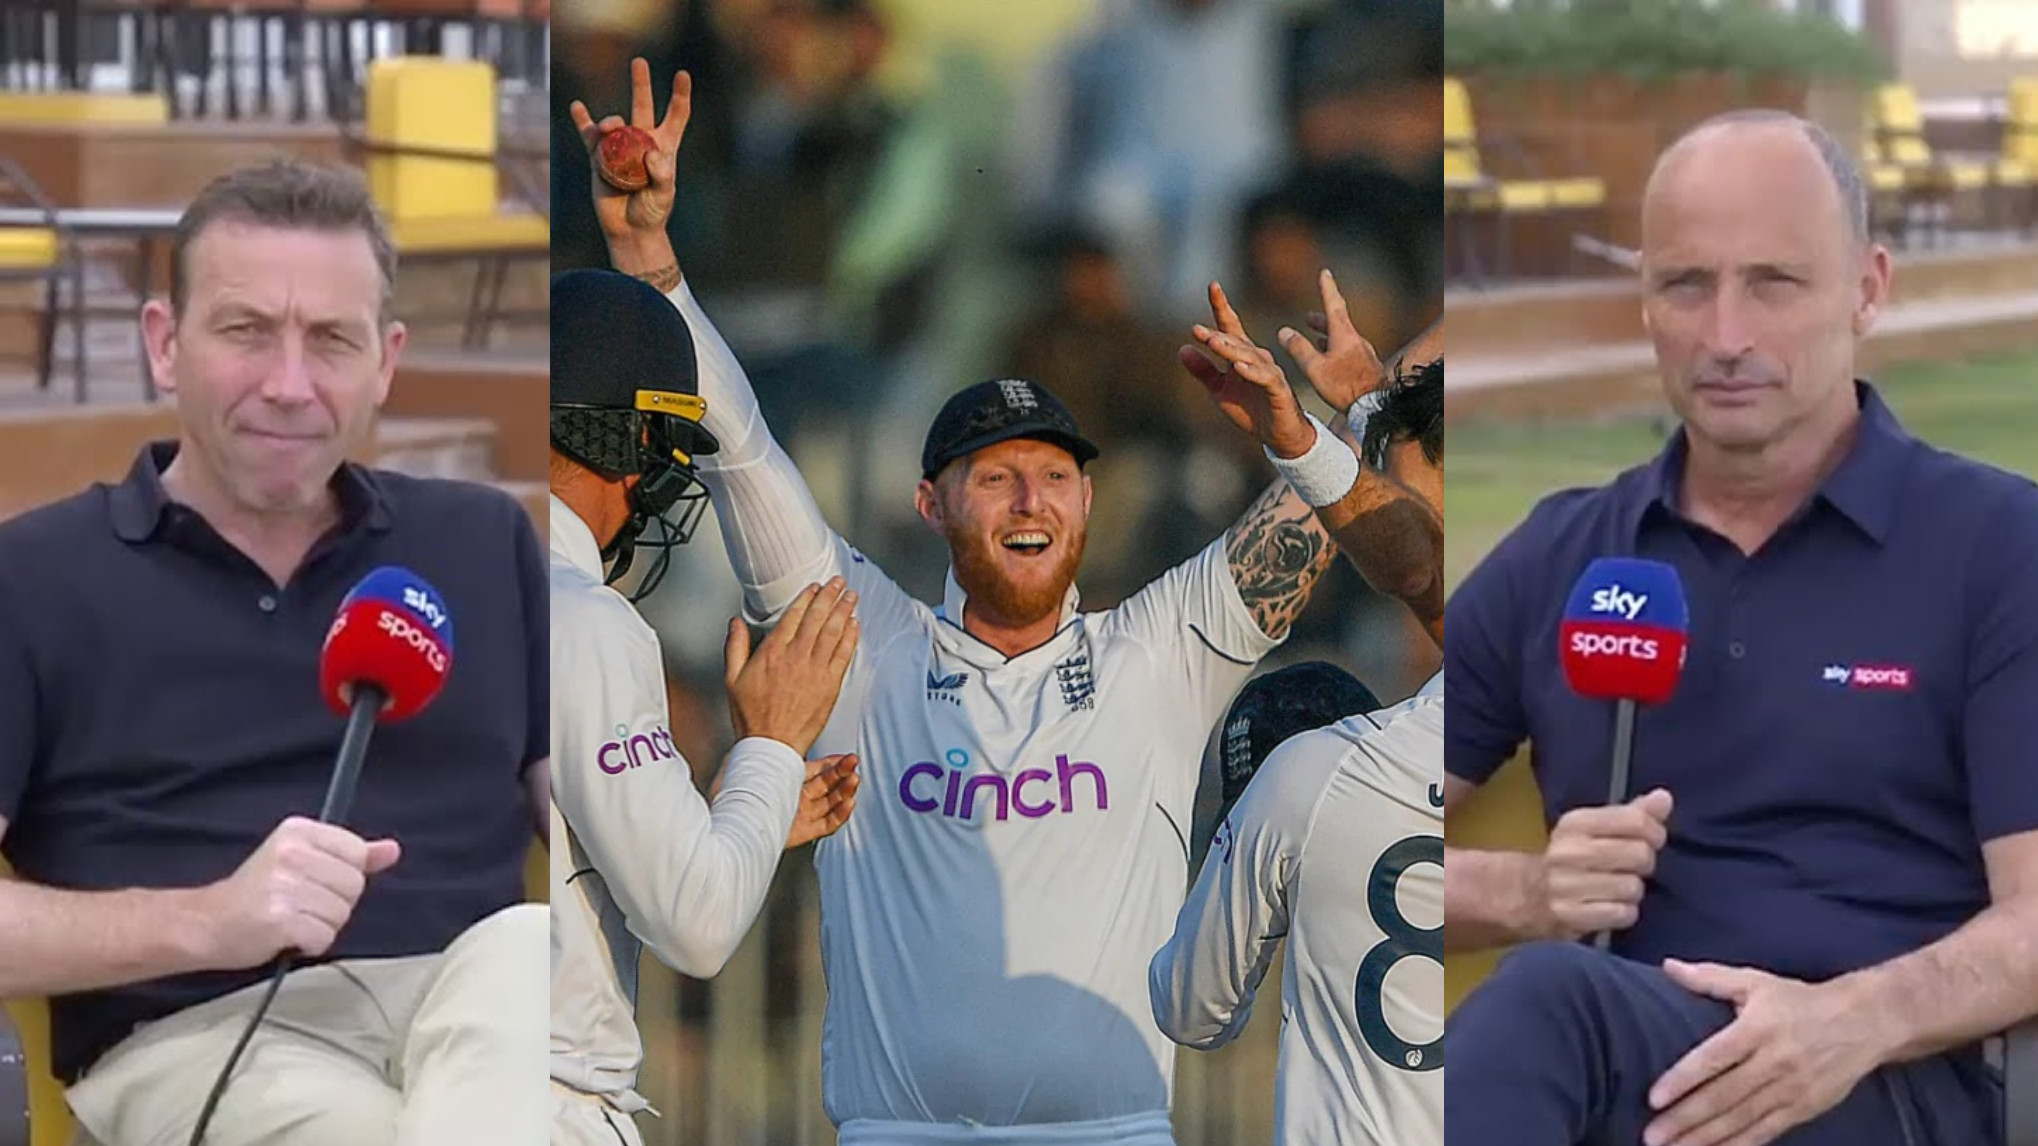 PAK v ENG 2022: Atherton and Hussain react to Ben Stokes rating England’s Rawalpindi Test victory ‘one of the best away wins’